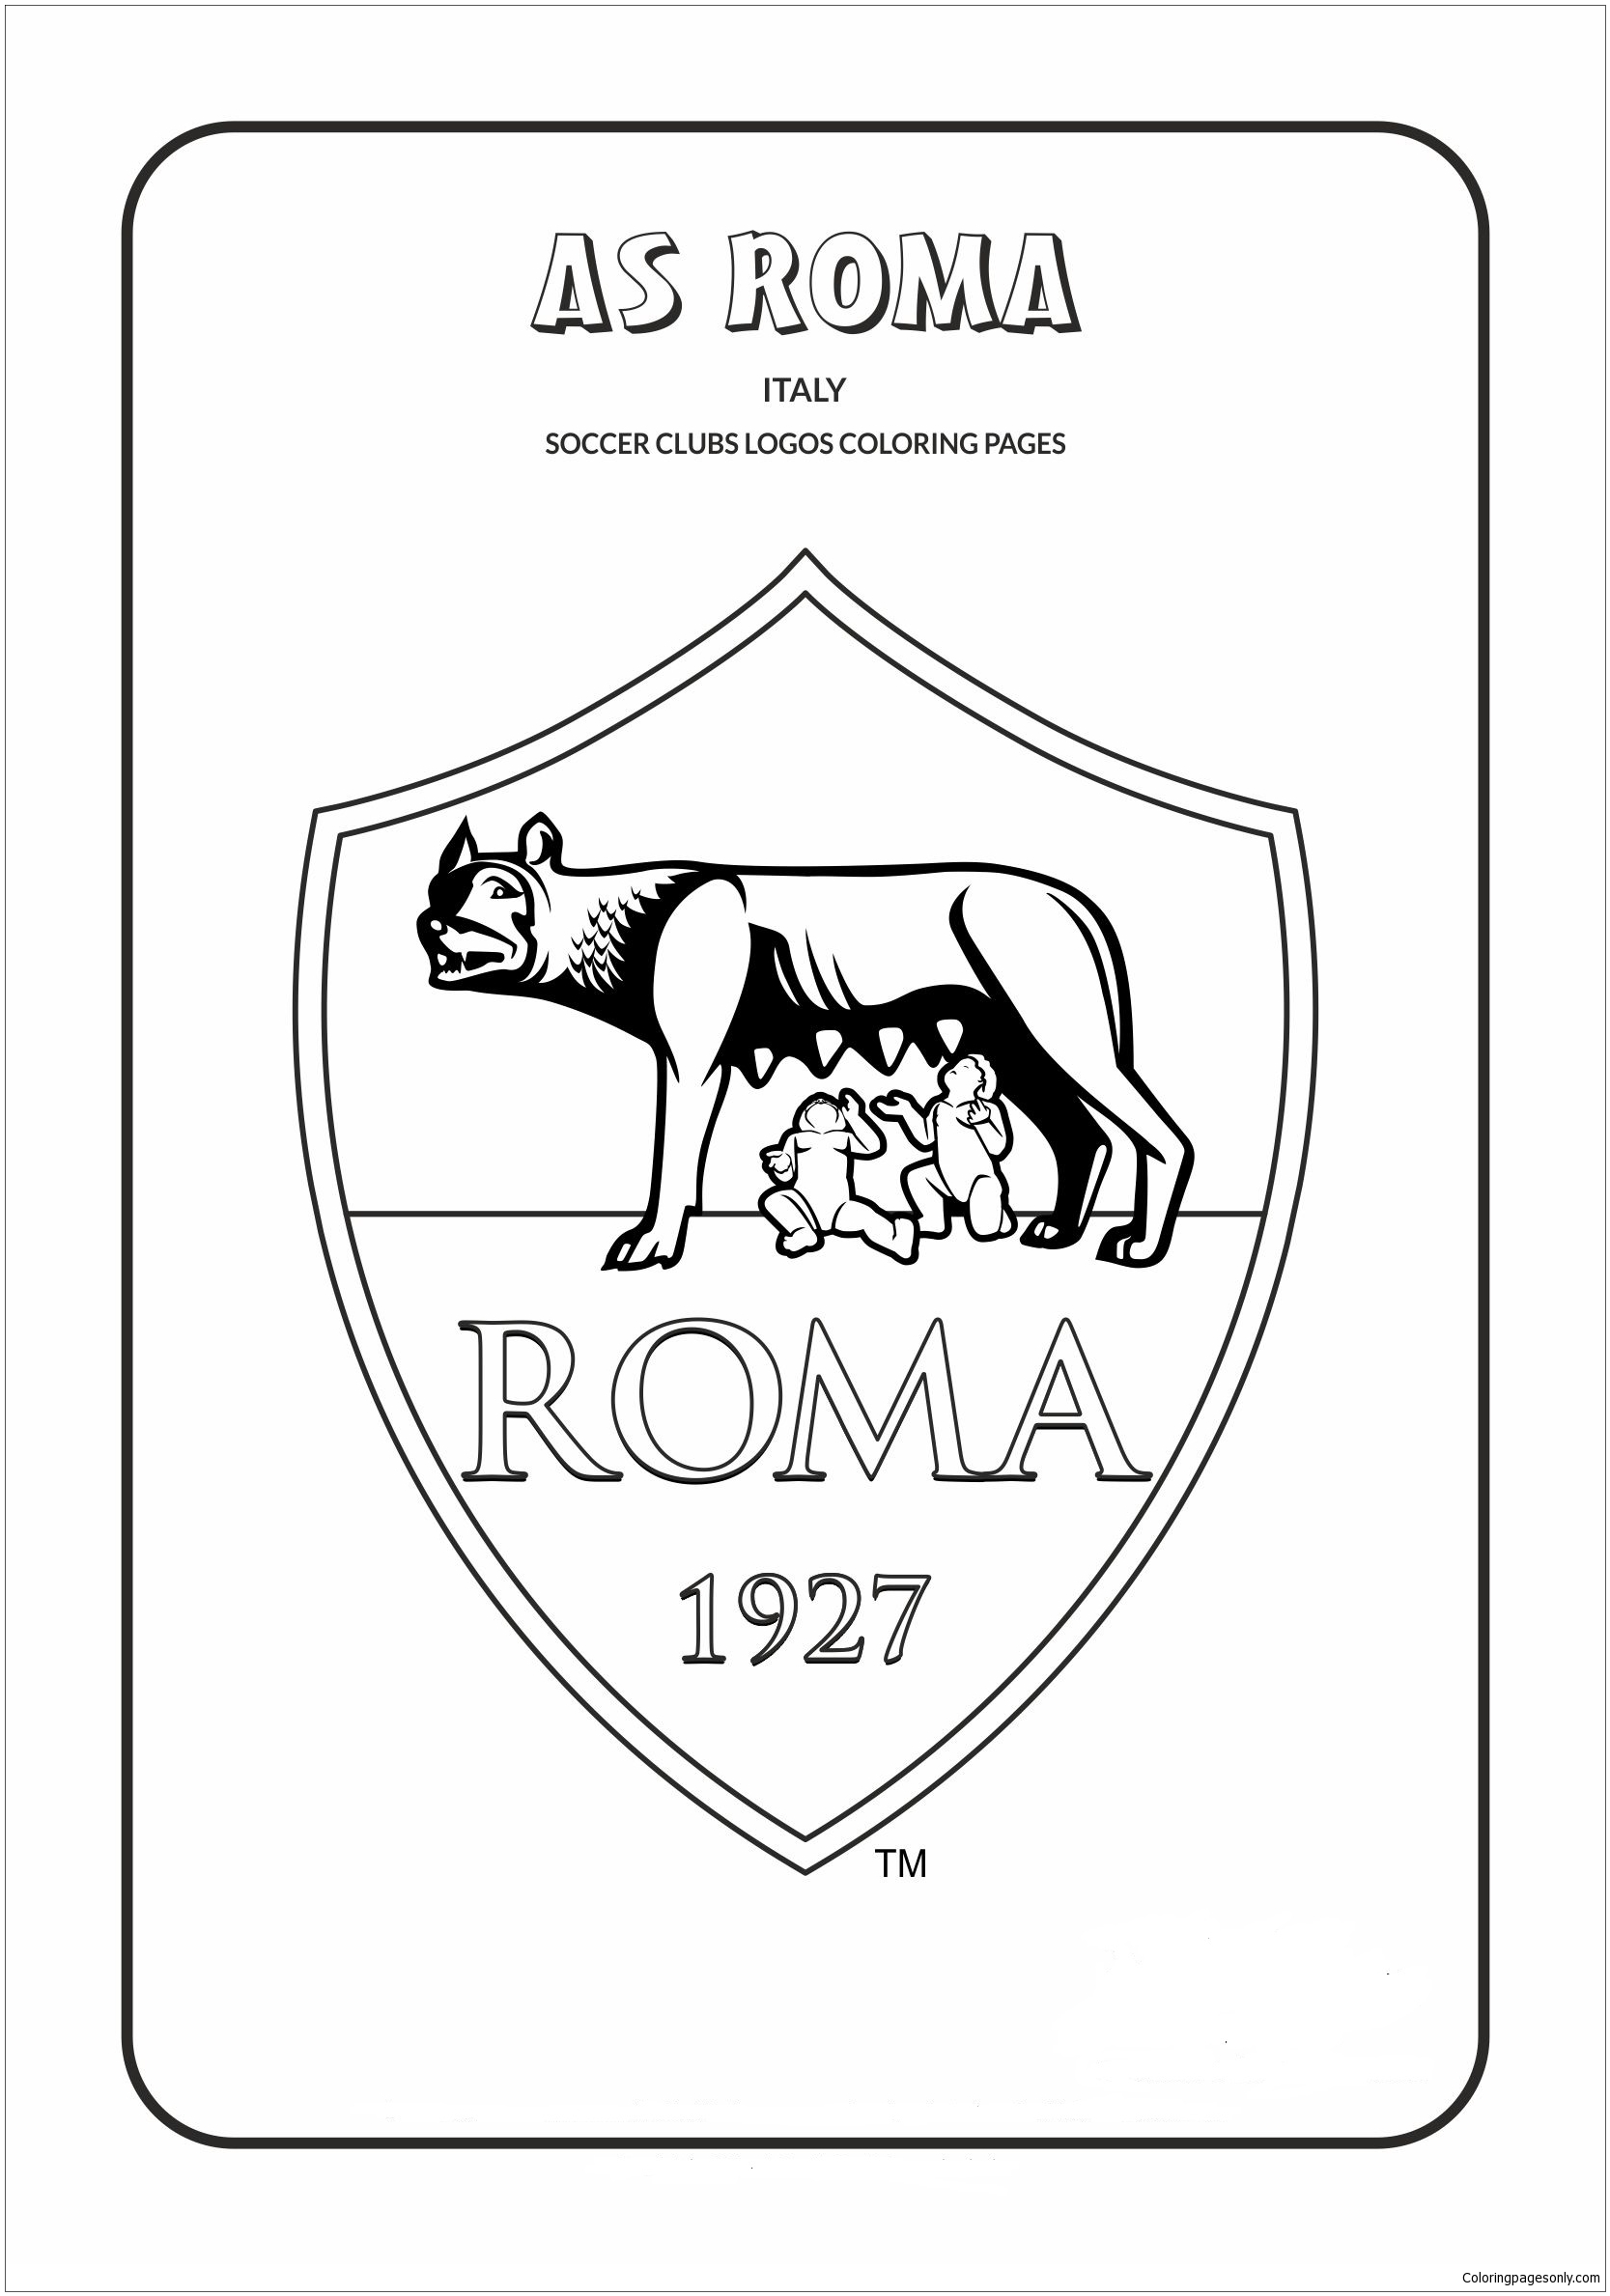 A.S. Roma Coloring Page